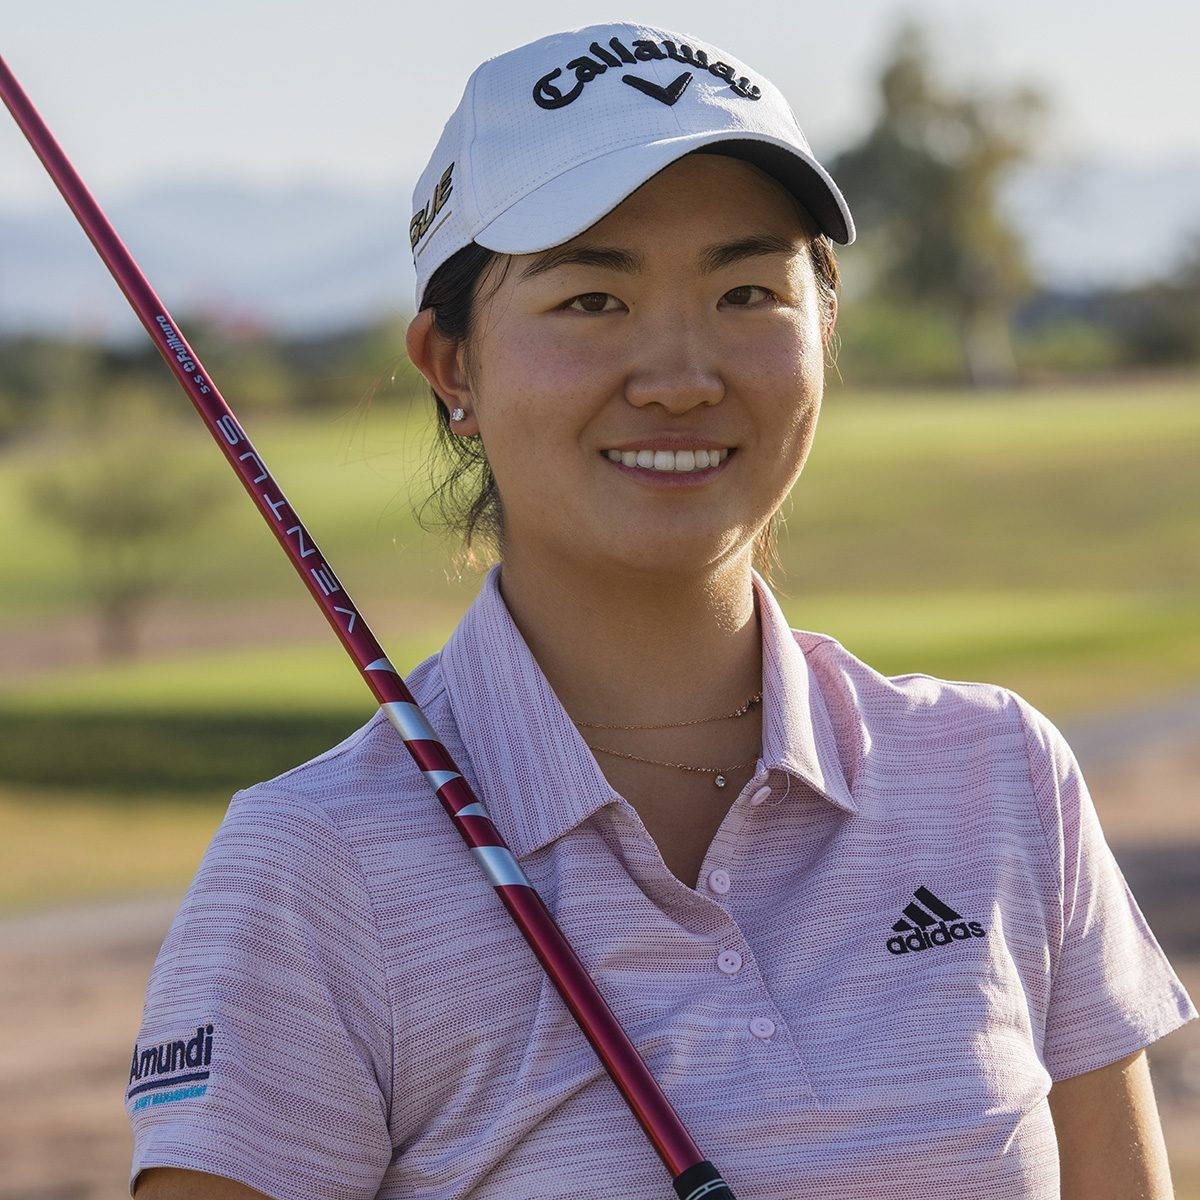 WORLD NO. 1 WOMEN’S AMATEUR GOLFER ROSE ZHANG BECOMES FIRST STUDENT-ATHLETE TO SIGN NIL ENDORSEMENT AGREEMENT WITH ADIDAS